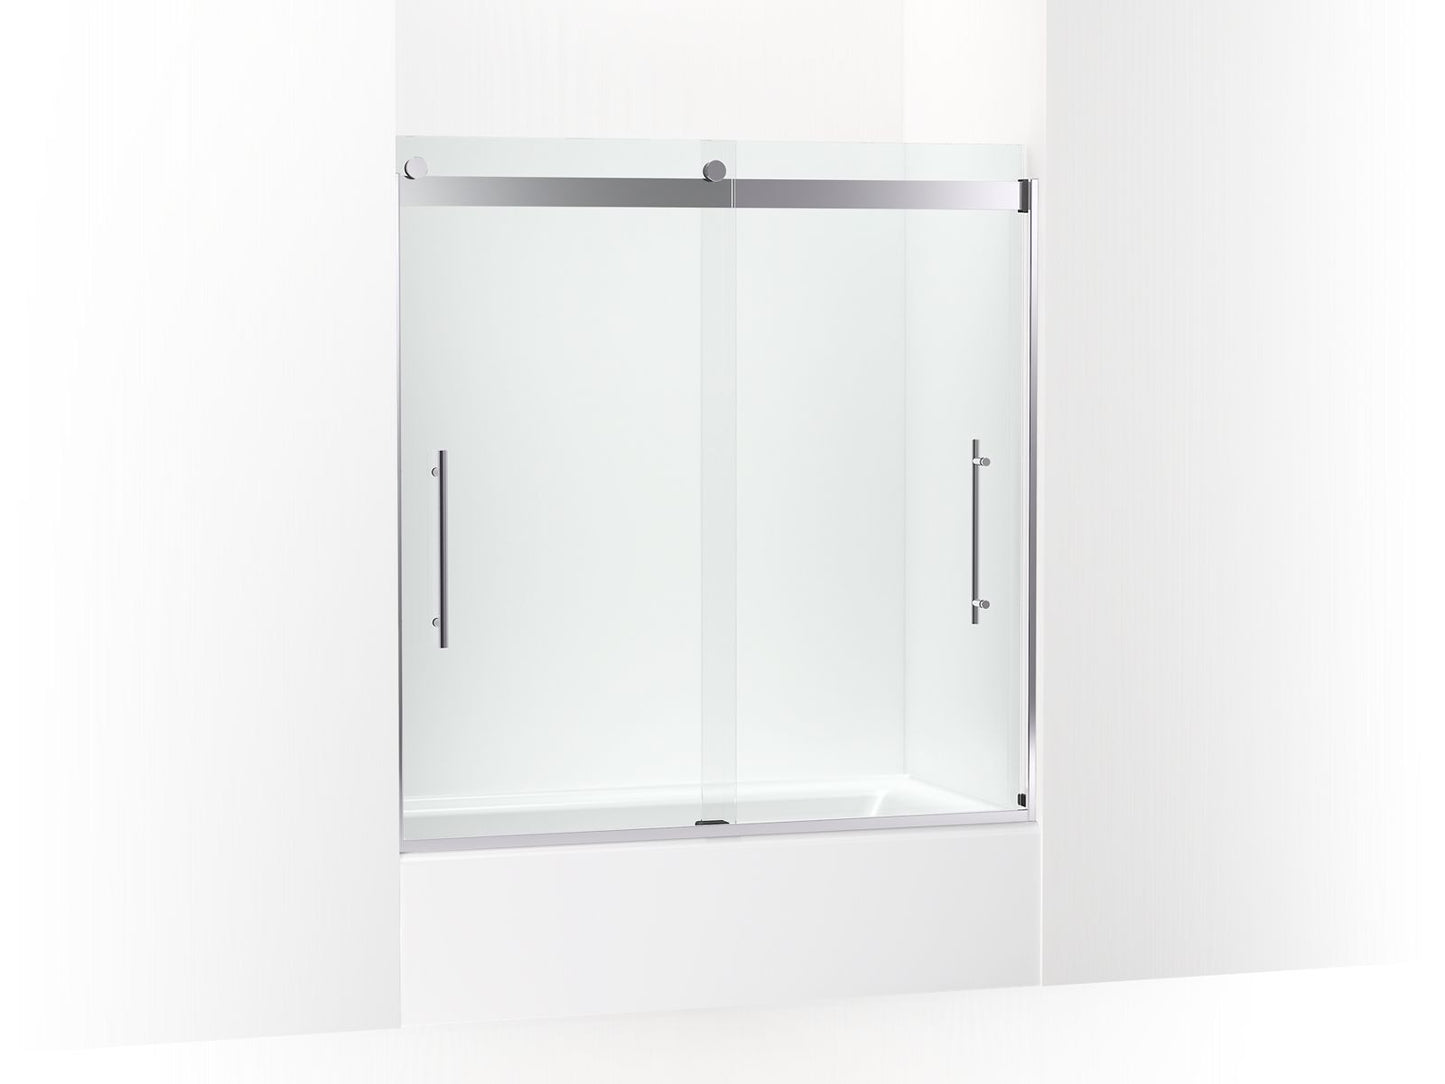 KOHLER K-702425-L-SHP Levity Plus Frameless Sliding Bath Door, 61-9/16" H X 56-5/8 - 59-5/8" W, With 3/8"-Thick Crystal Clear Glass In Bright Polished Silver